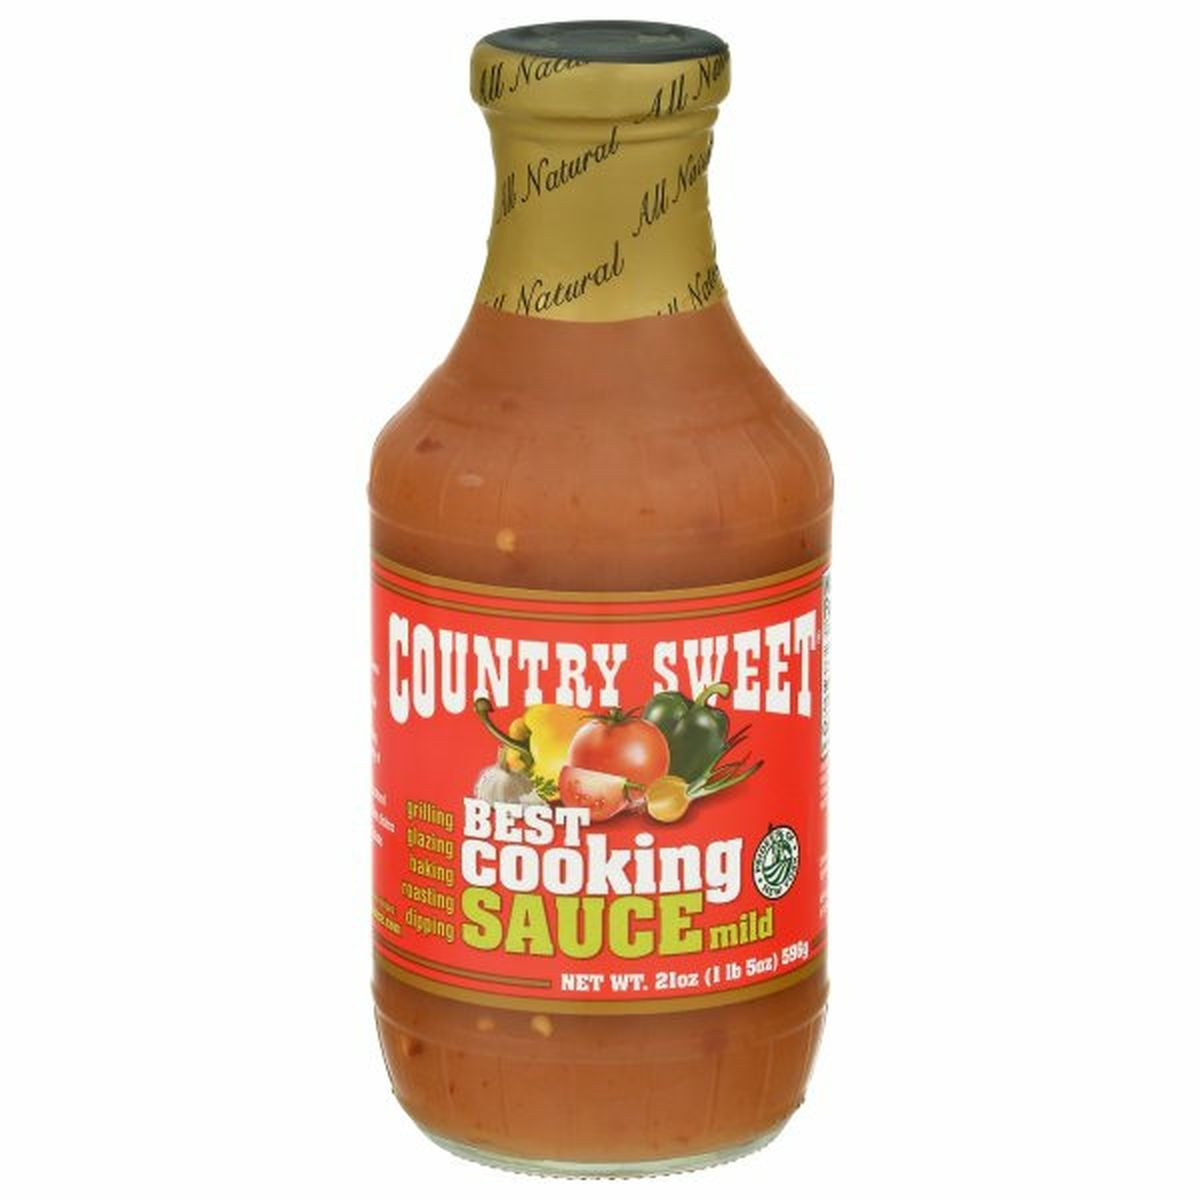 Calories in Country Sweet Cooking Sauce, Mild